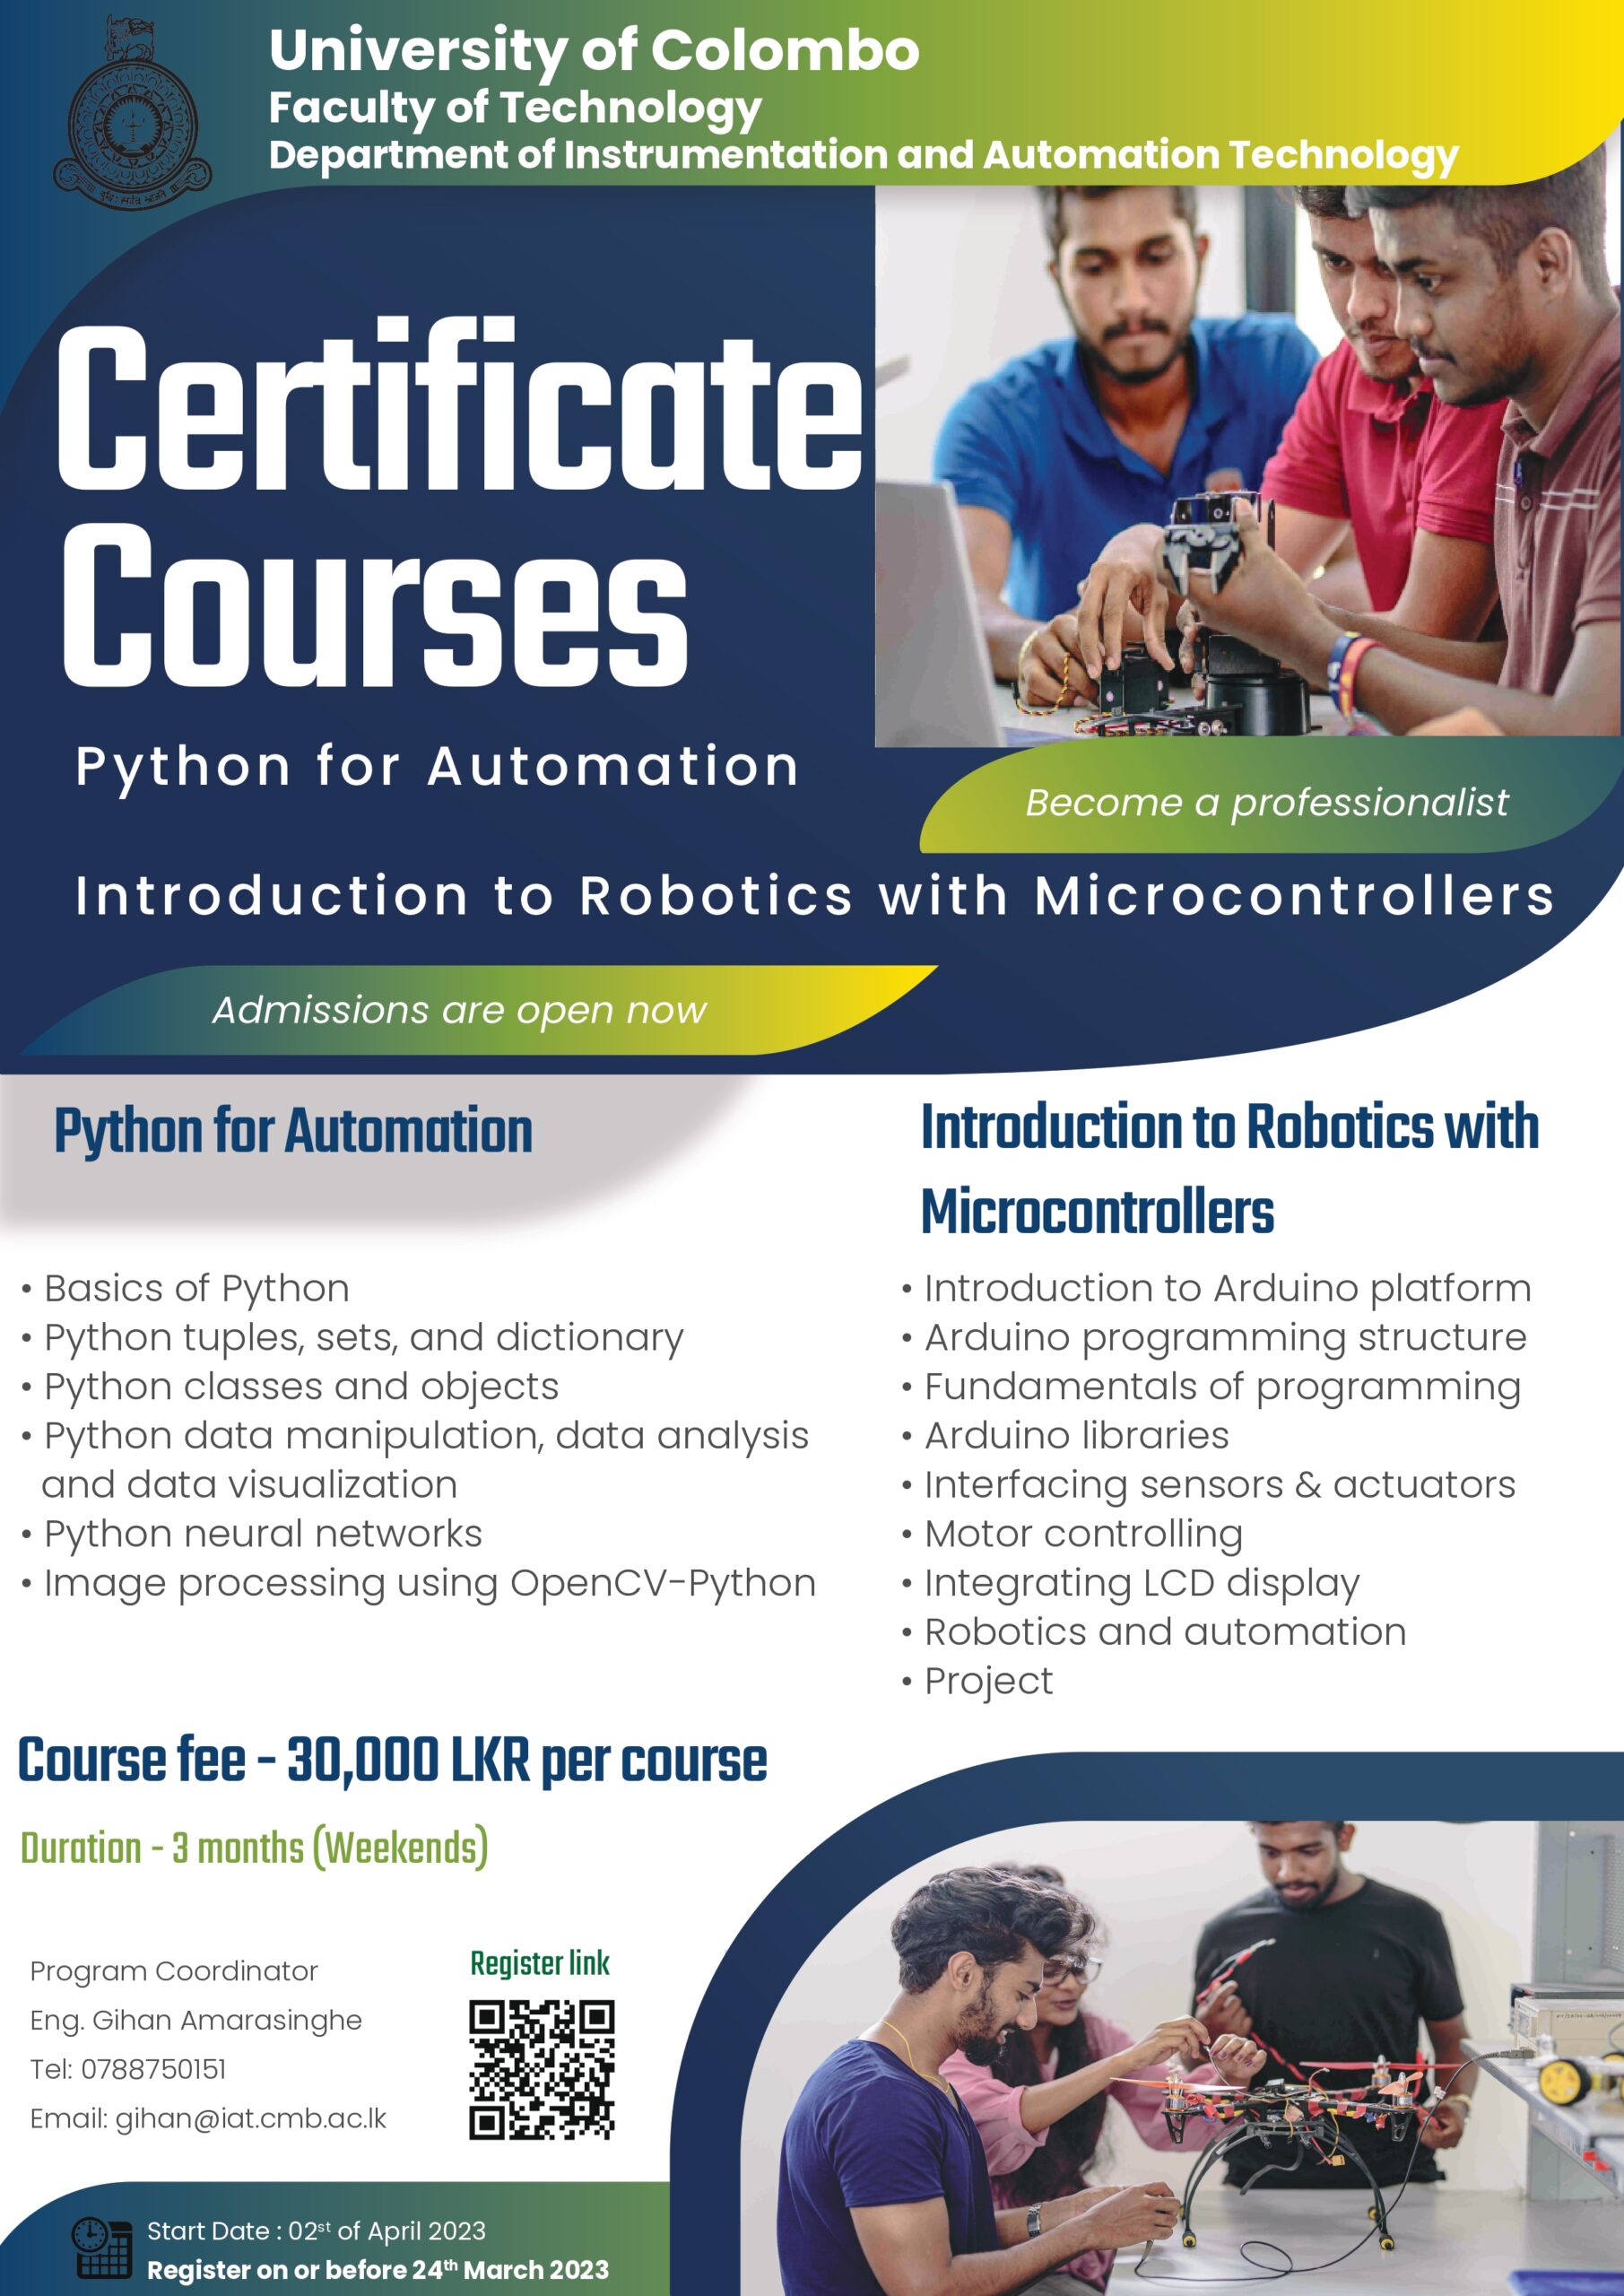 Registrations are open for the certificate courses